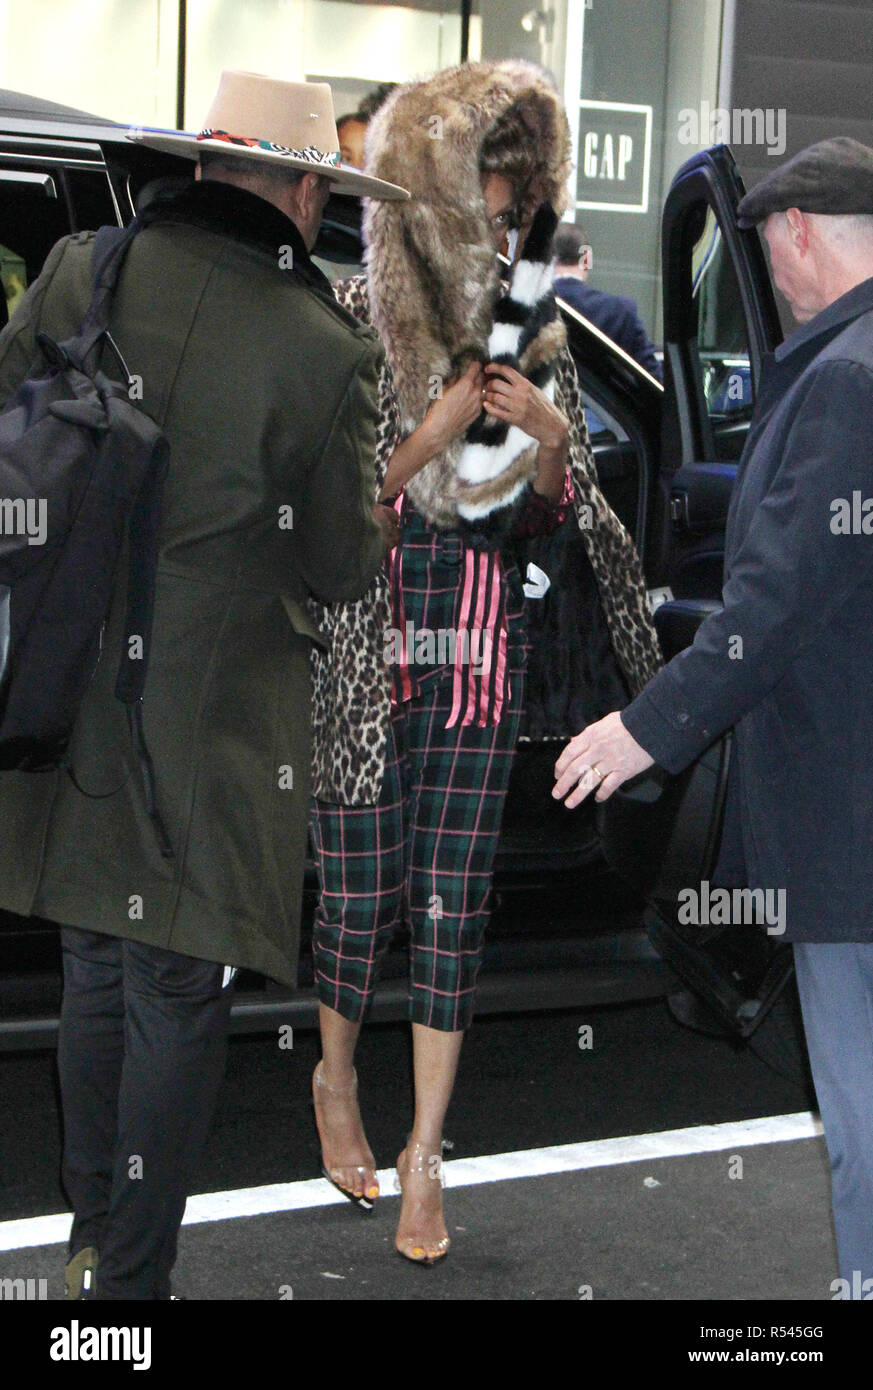 New York, NY, USA. 29th Nov, 2018. Tyra Banks seen at Good Morning America promoting her new movie Life-Size 2: A Christmas Eve on November 29, 2018 in New York City. Credit: Rw/Media Punch/Alamy Live News Stock Photo